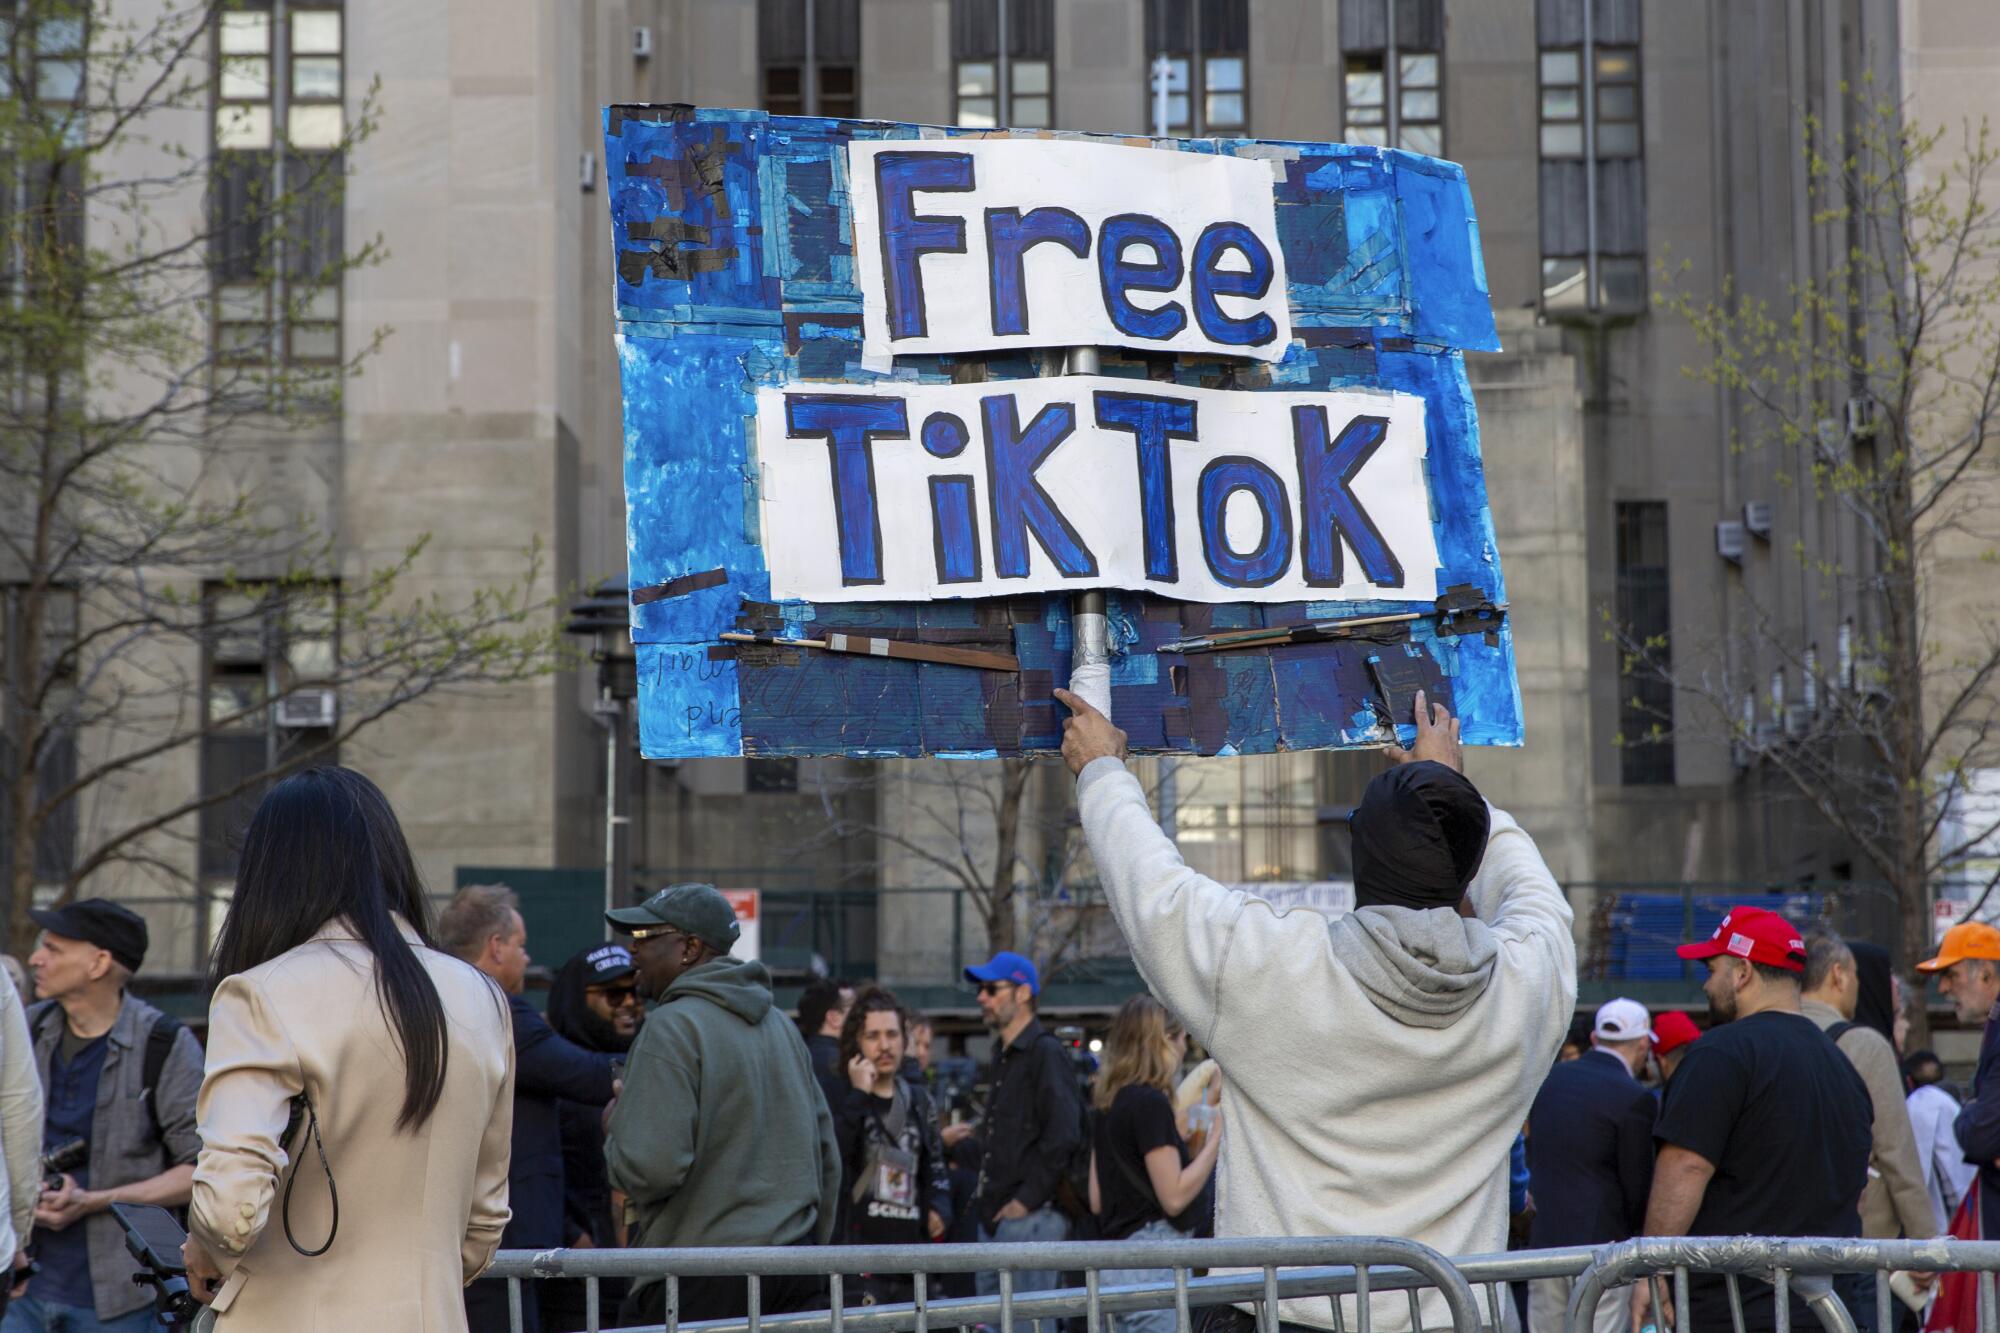 A man carries a Free TikTok sign in front of a building with a crowd of people